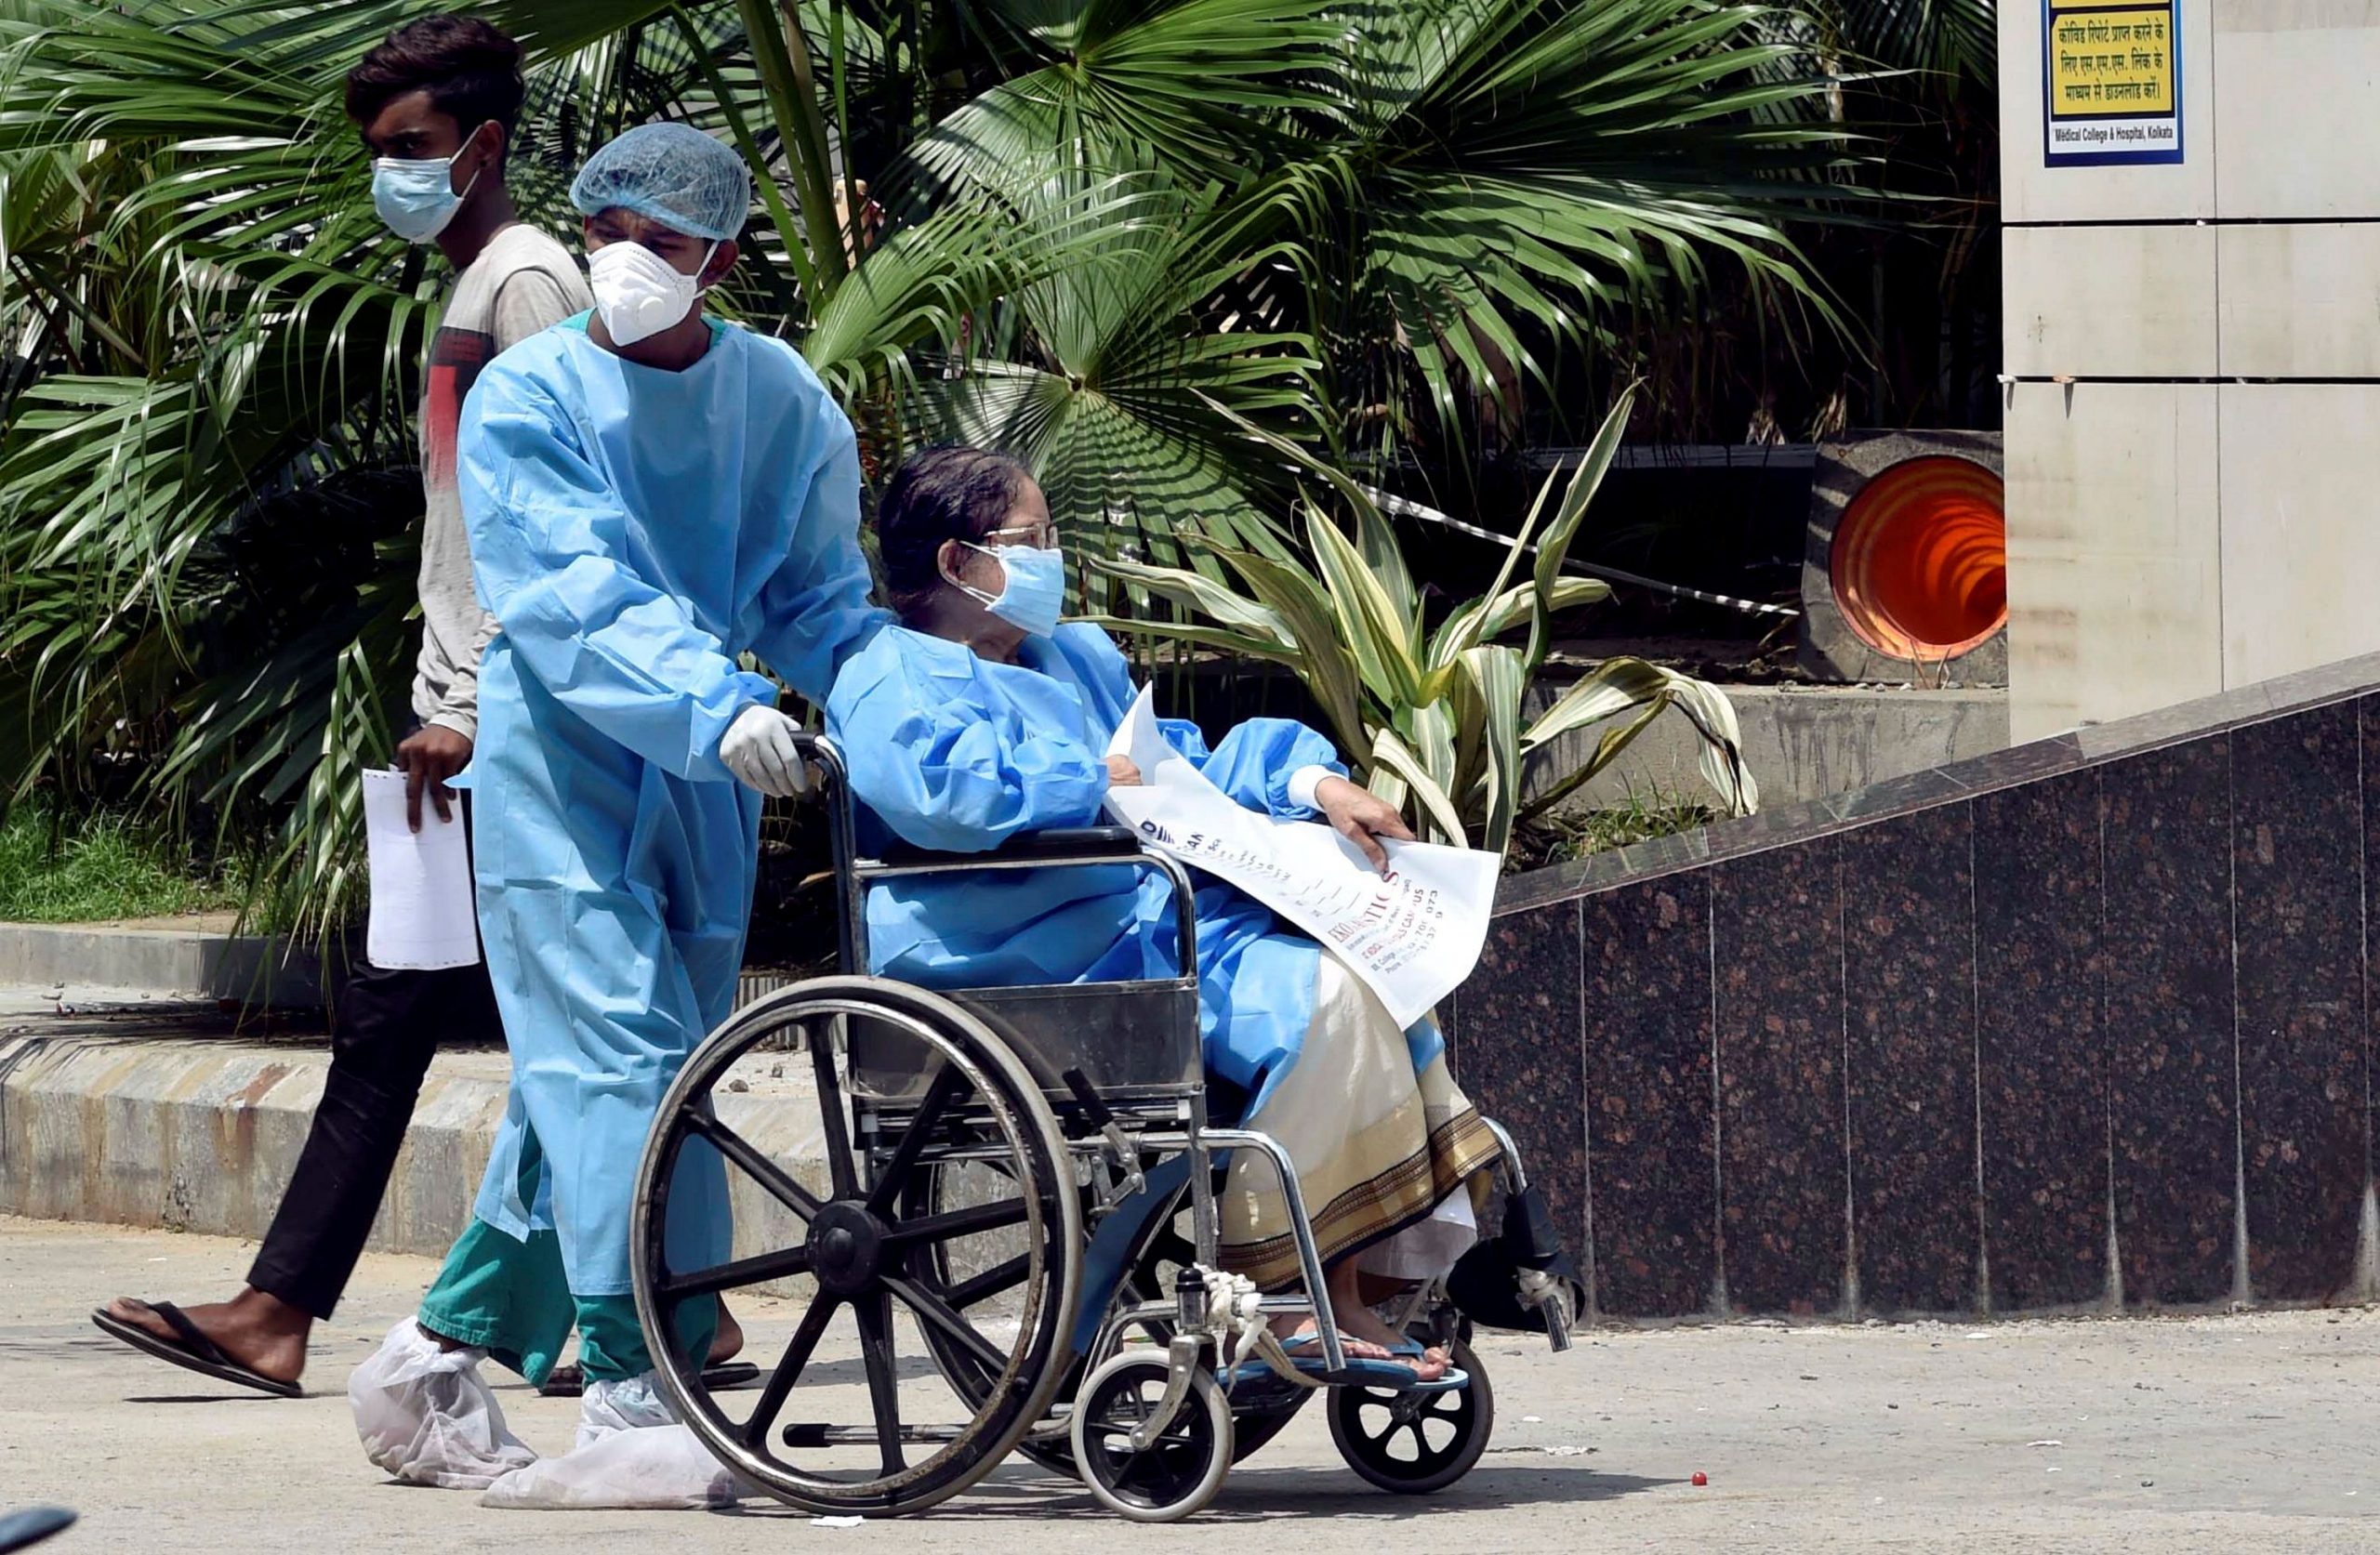 India records 173,790 new COVID-19 cases, lowest in 45 days; 3,617 deaths in 24 hours